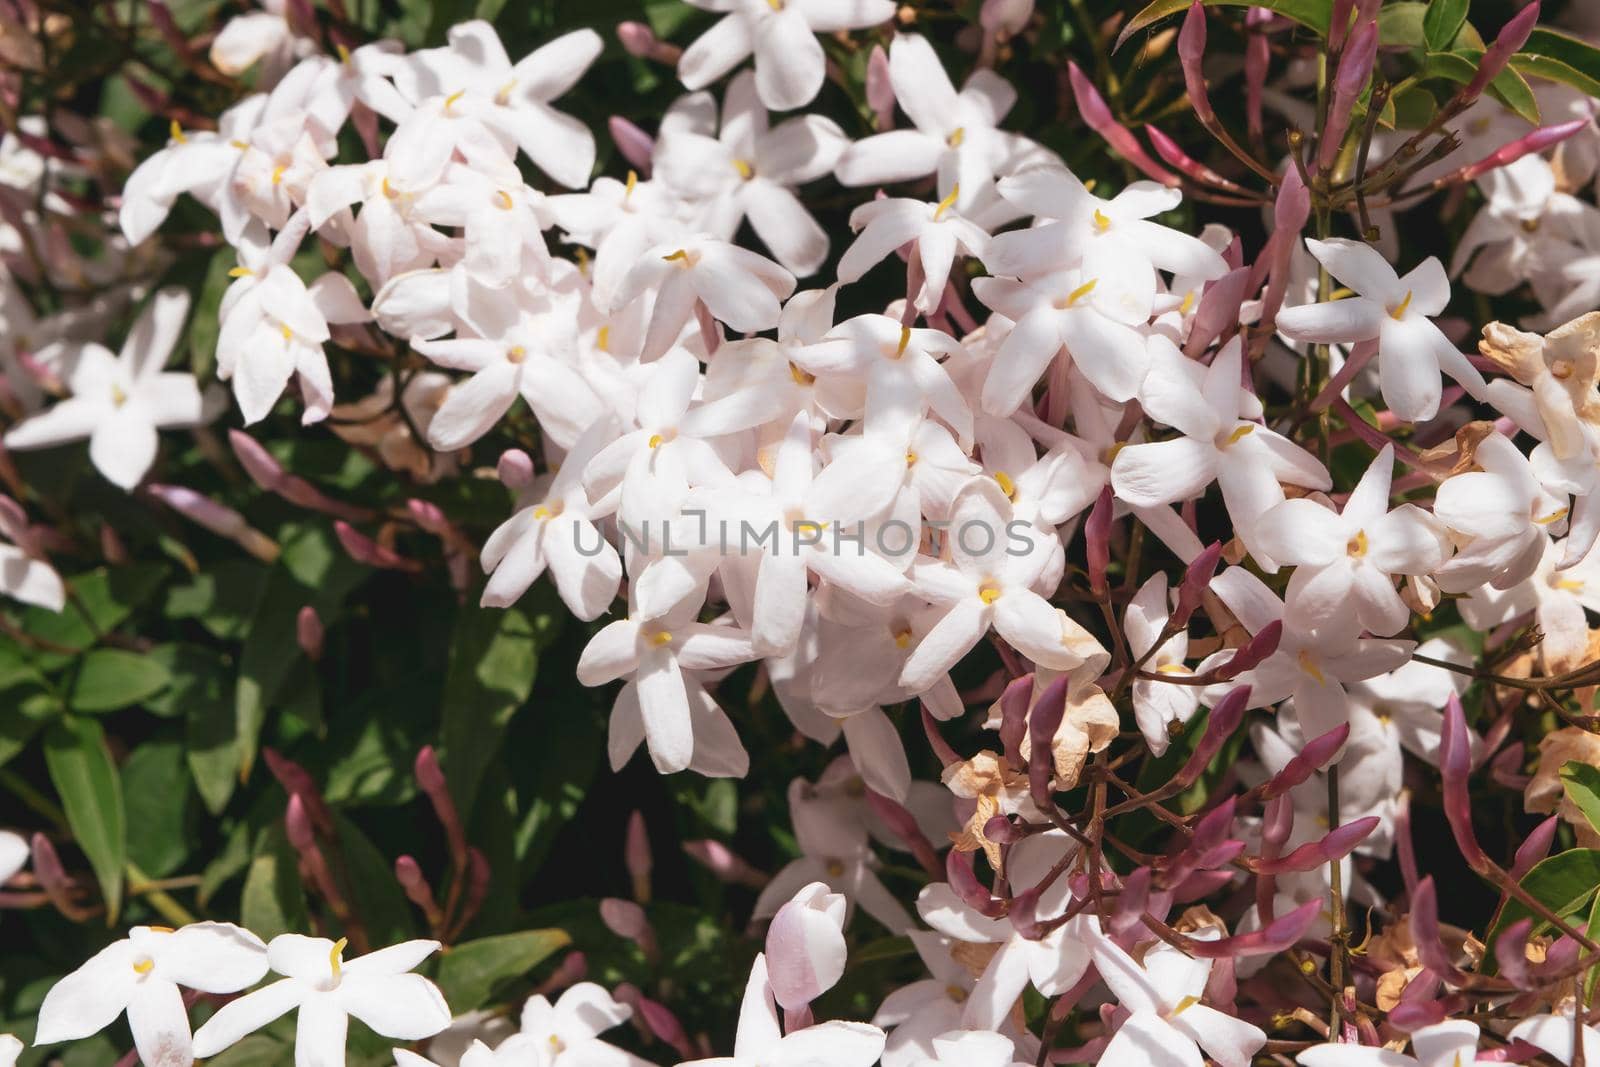 Close-up of a wonderful plant of jasmine, with its characteristic white flowers.